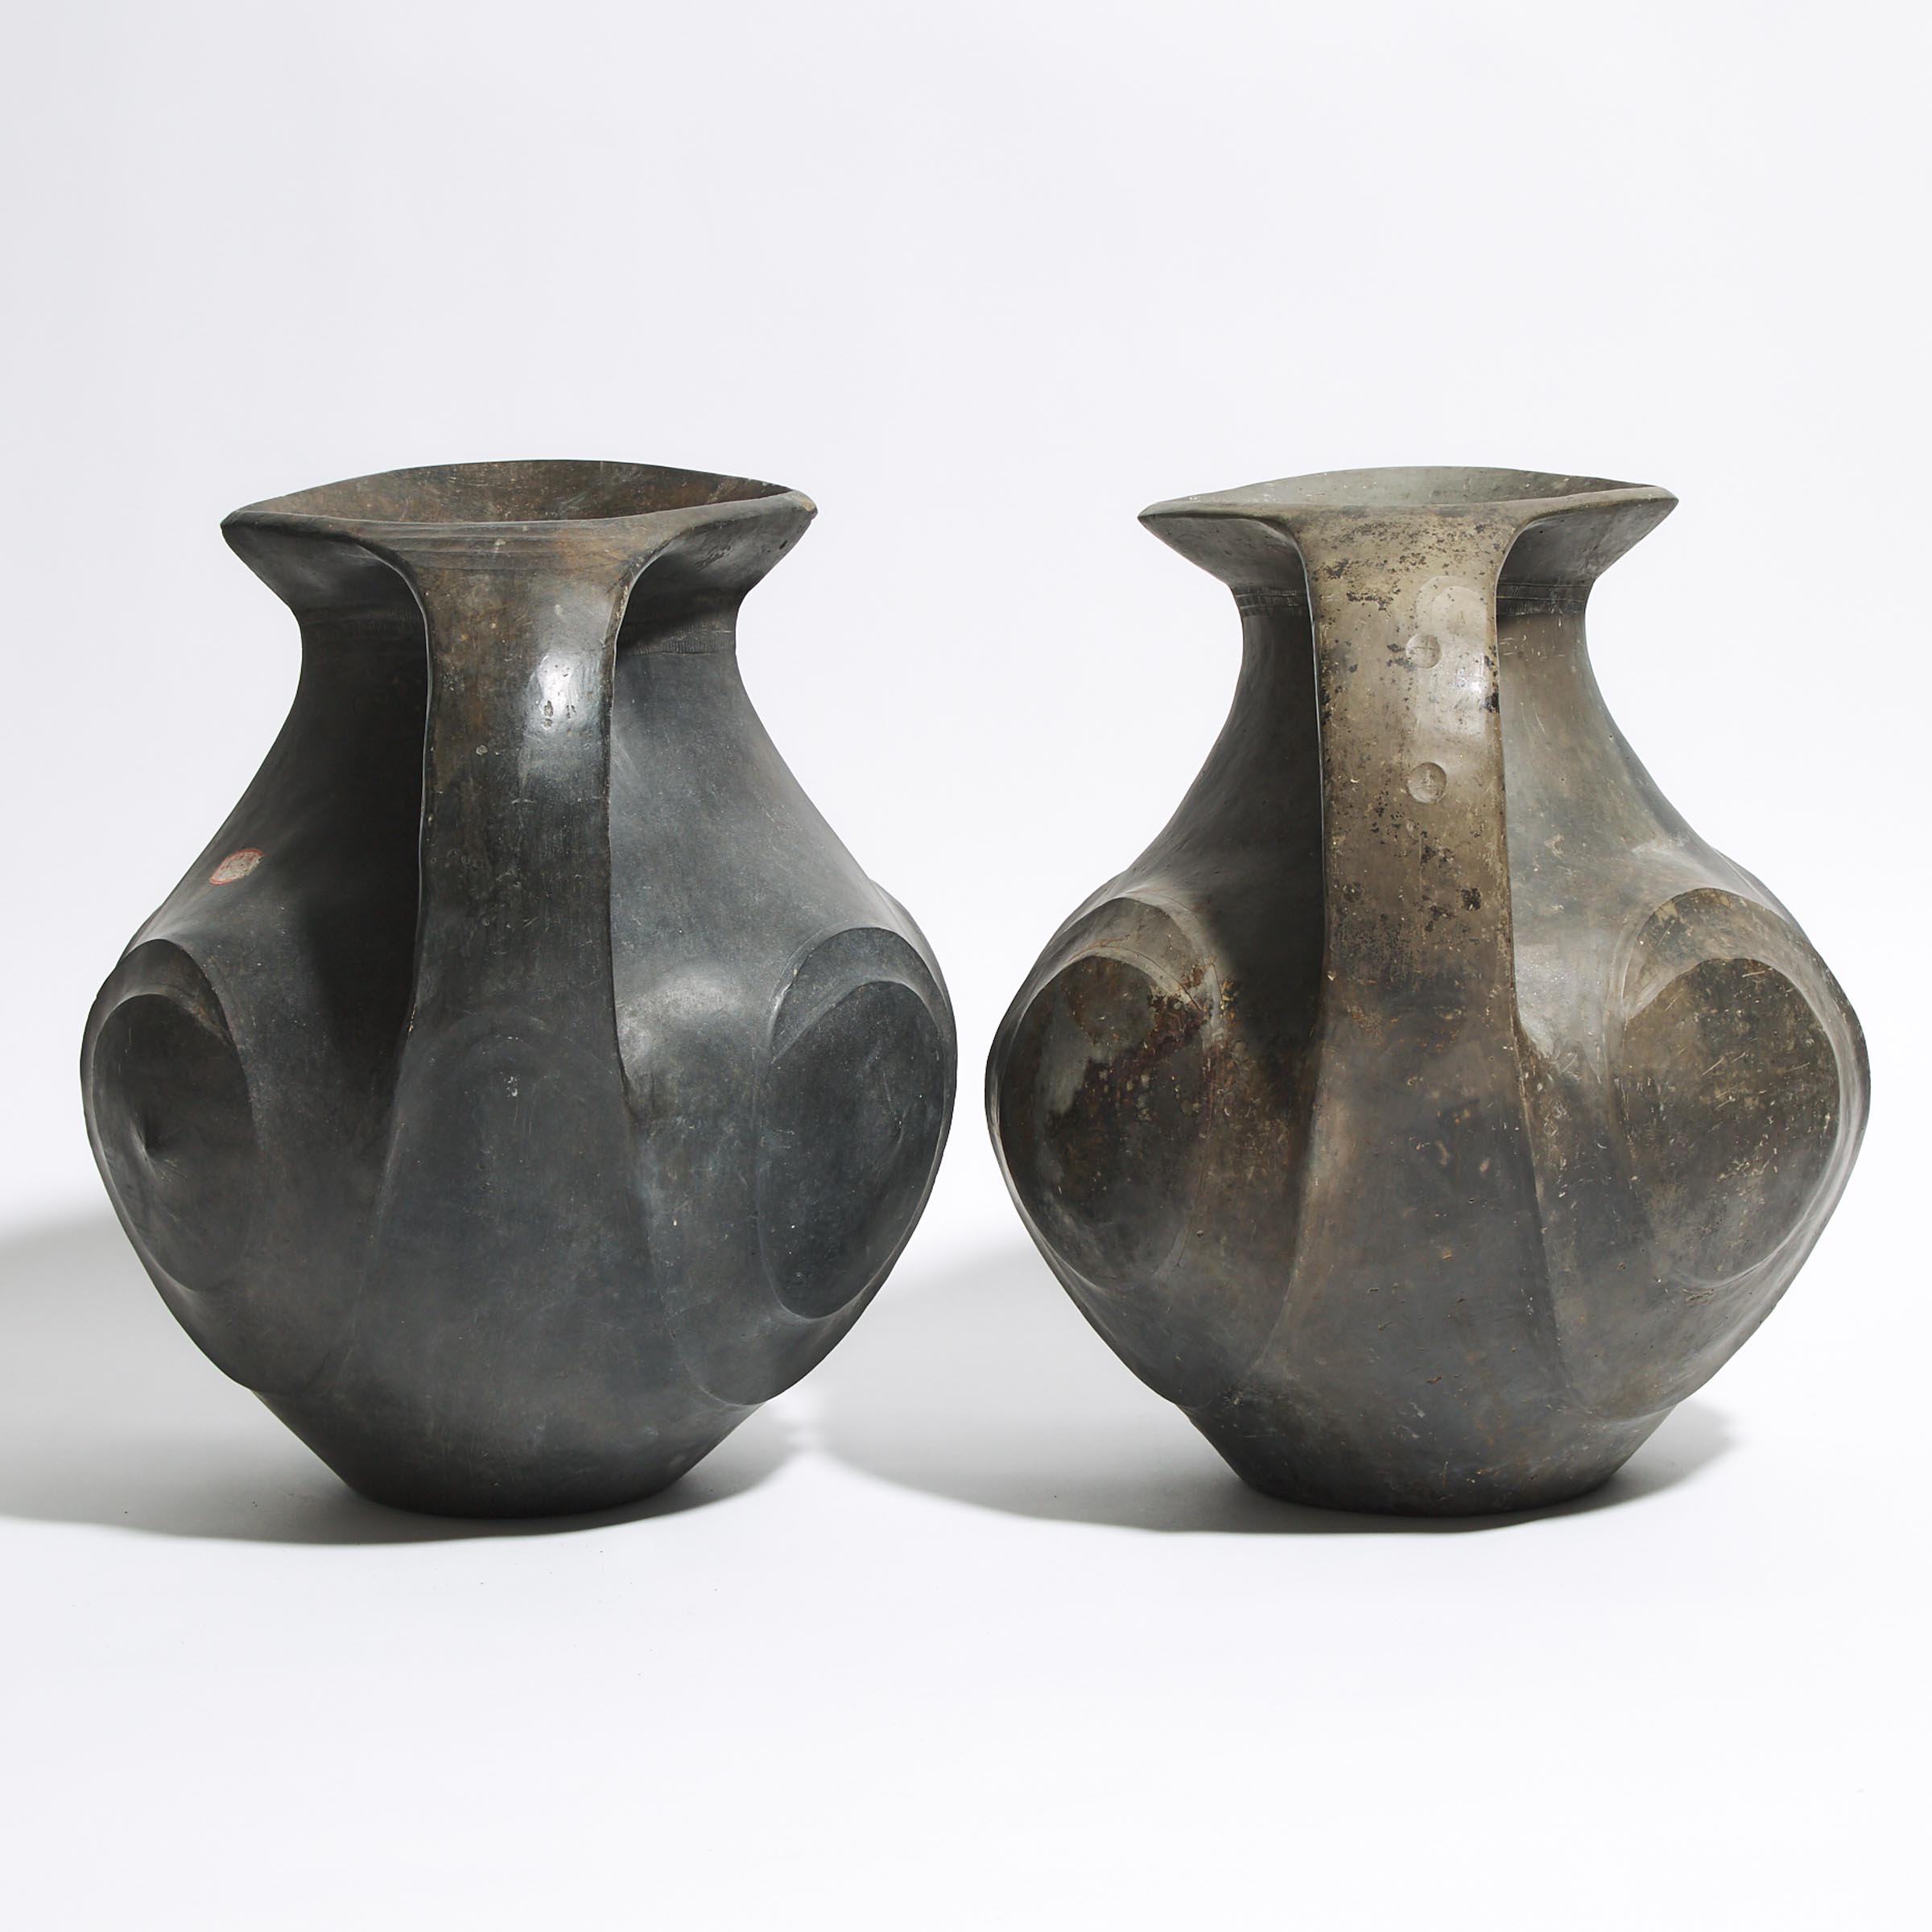 A Pair of Large Black Pottery Amphorae, Han Dynasty (206 BC - AD 220)